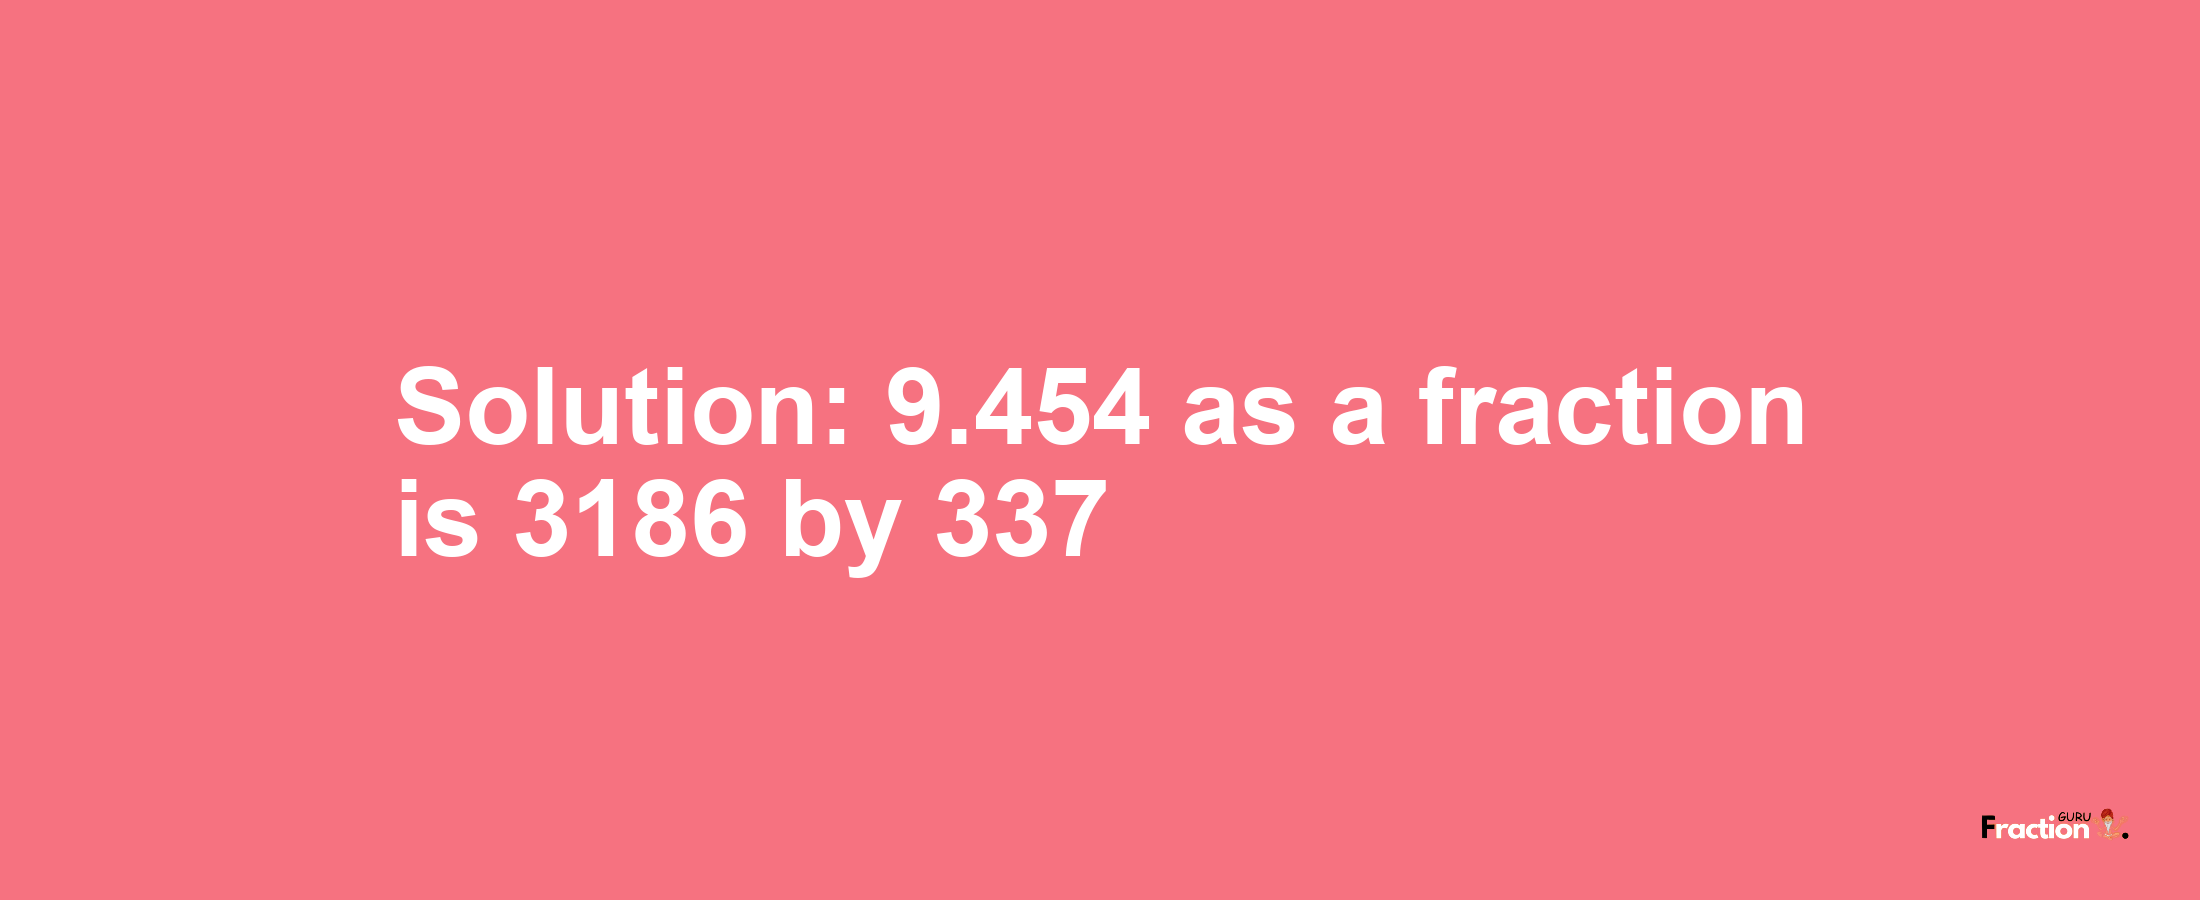 Solution:9.454 as a fraction is 3186/337